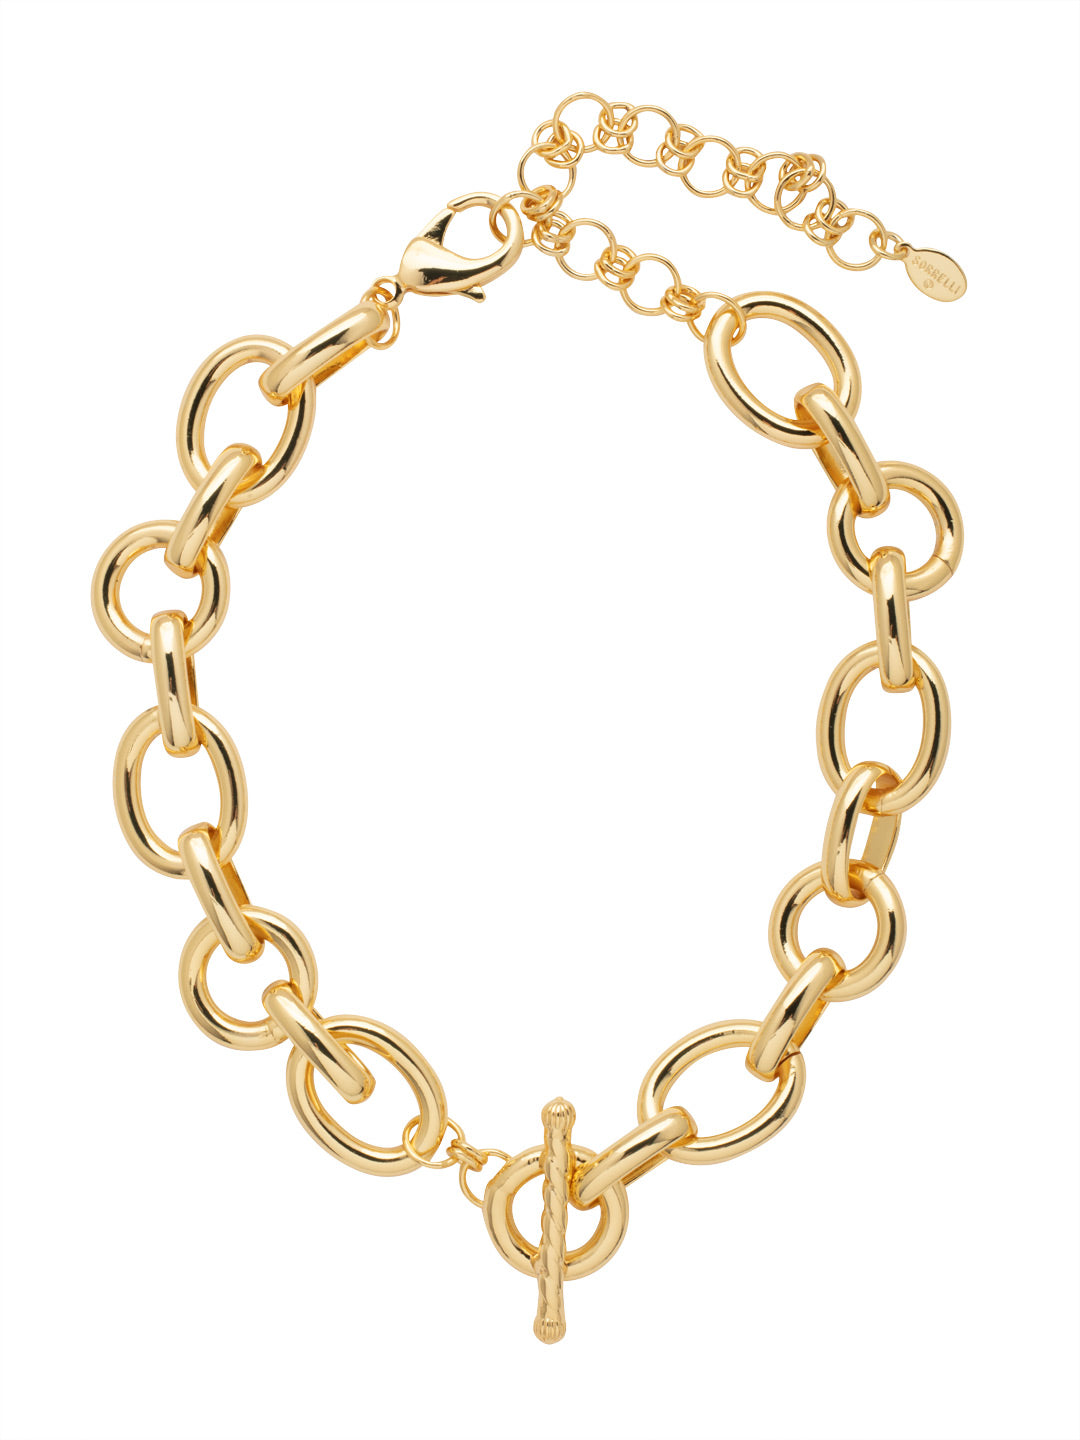 Jeanette Statement Necklace - 4NFC5BGMTL - <p>The Jeanette Statement Necklace features chunky chain links and a trendy toggle at the front. Adjustable and secured with a lobster claw clasp, The Jeanette Statement Necklace pairs perfectly with the matching Jeanette Bracelet. From Sorrelli's Bare Metallic collection in our Bright Gold-tone finish.</p>